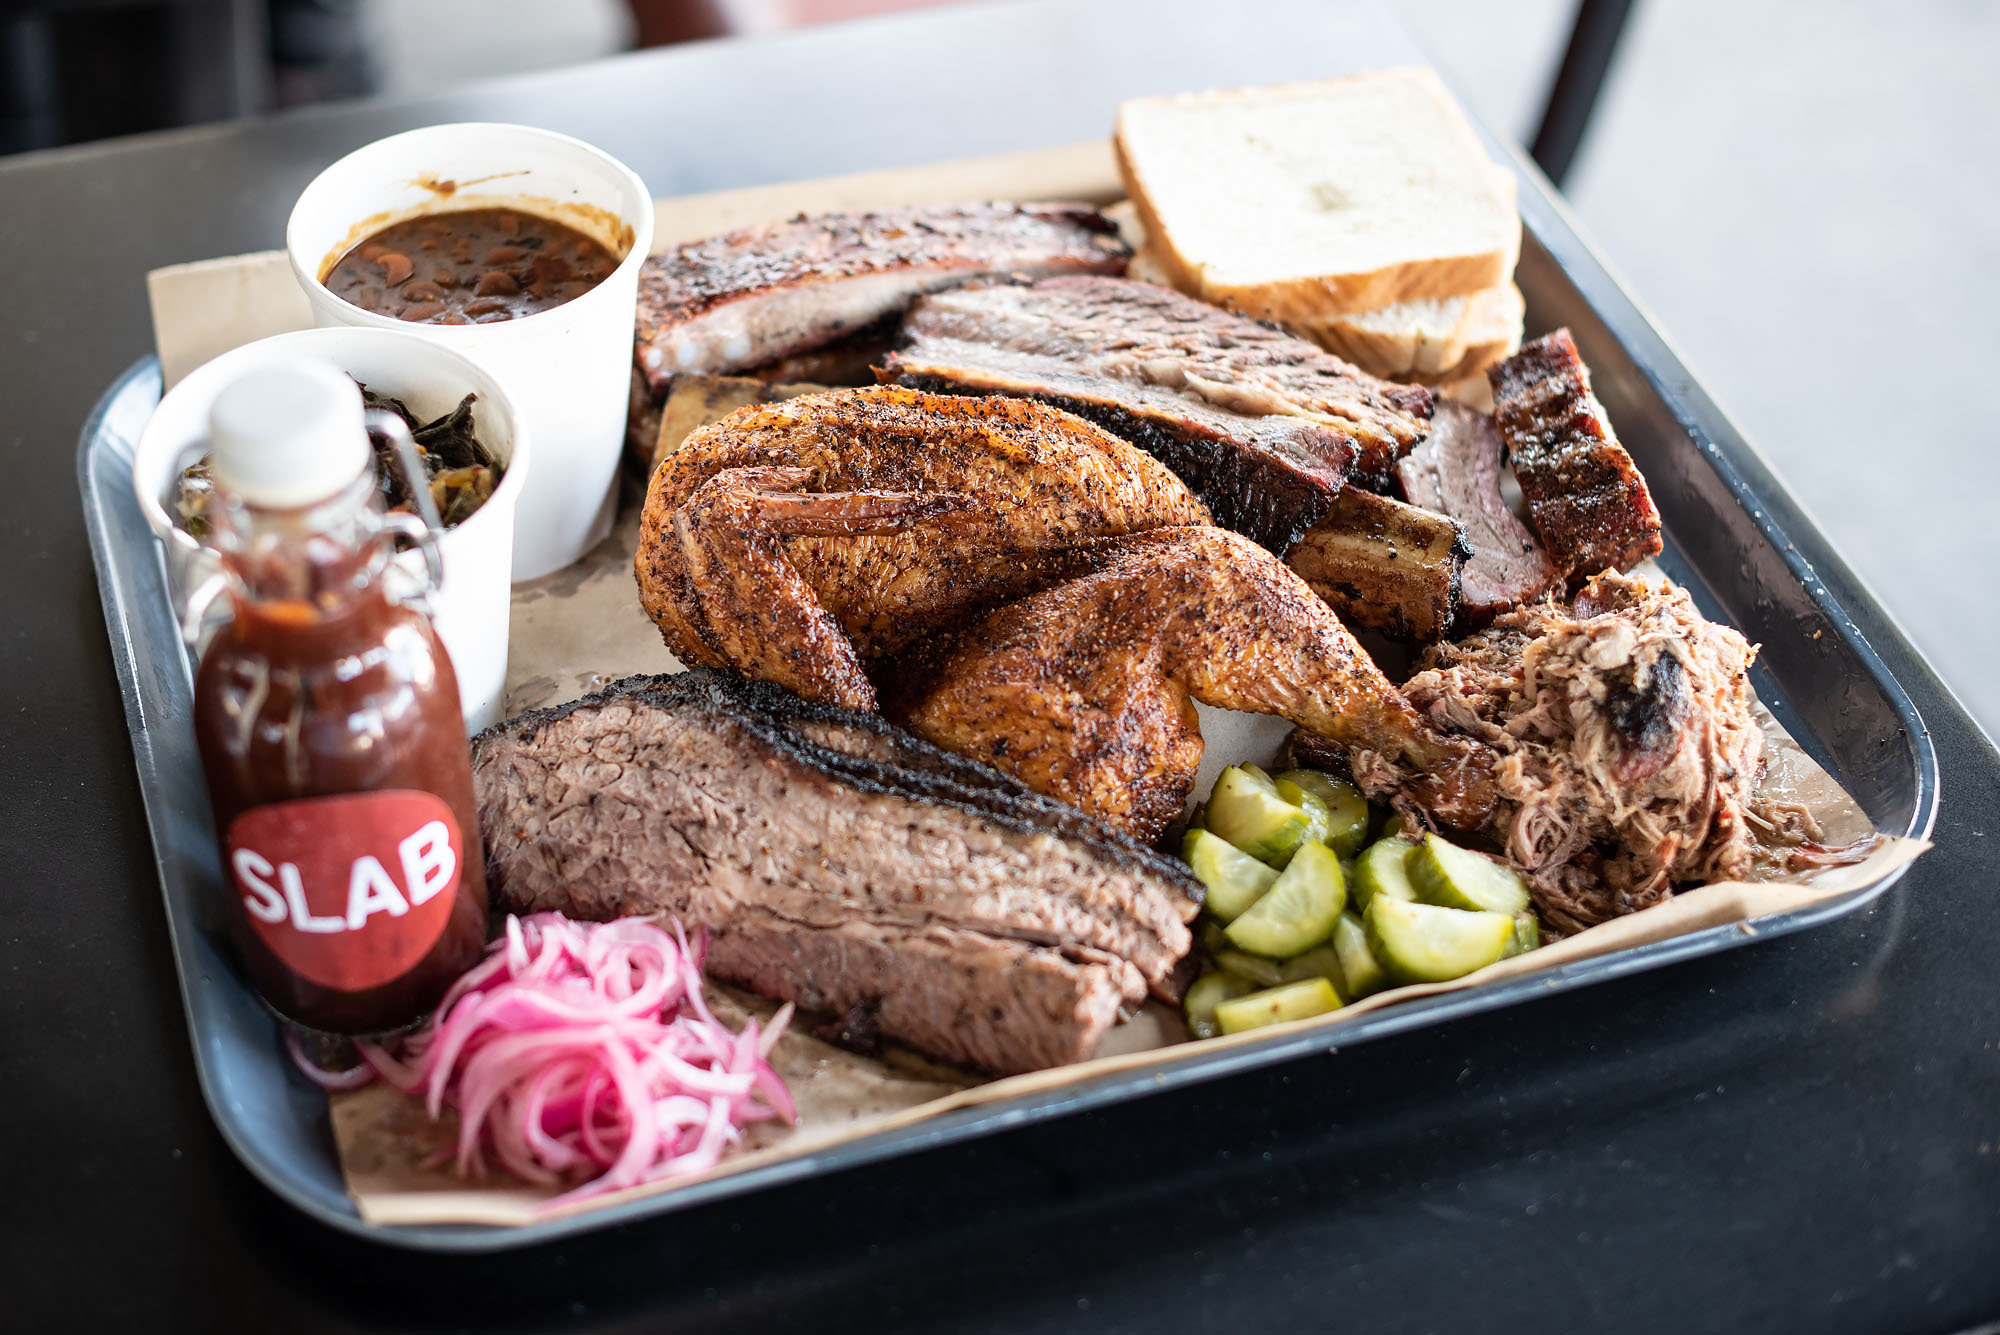 A plate of barbecue, including brisket, smoked chicken, ribs, and sauce.